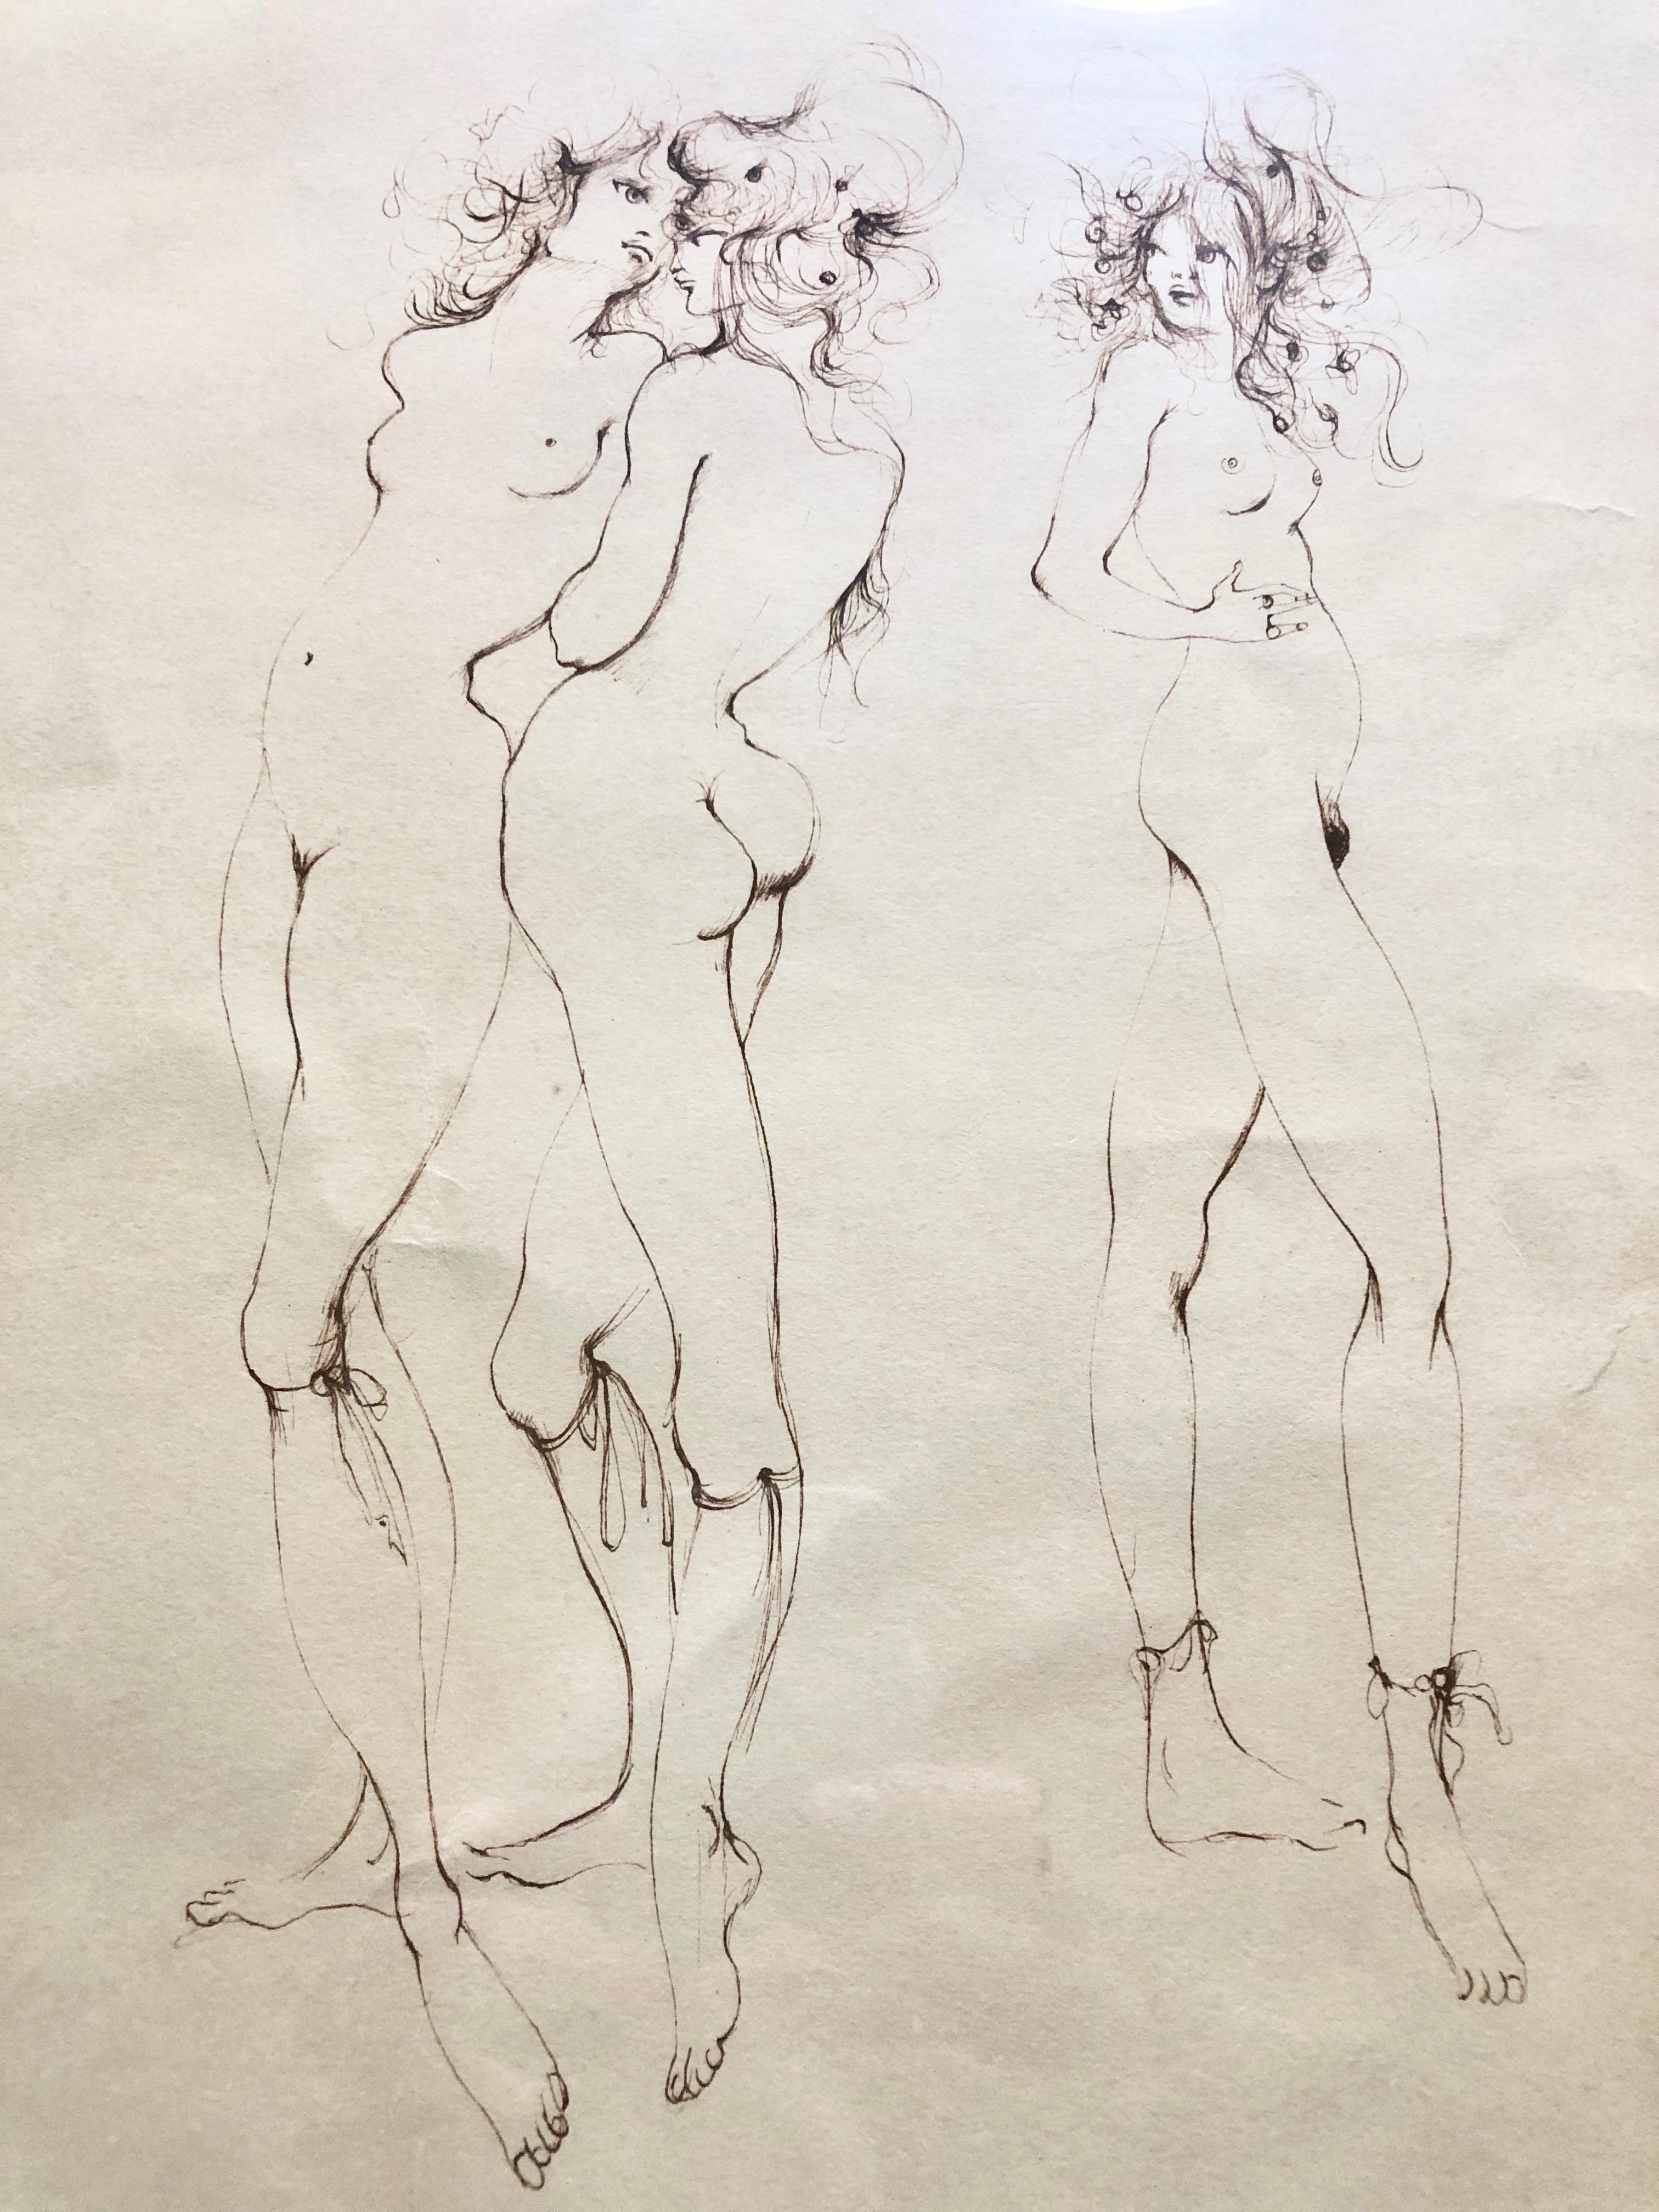 Framed, Signed And Numbered Etching By Leonor Fini, Three Naked Women 88/150 For Sale 4